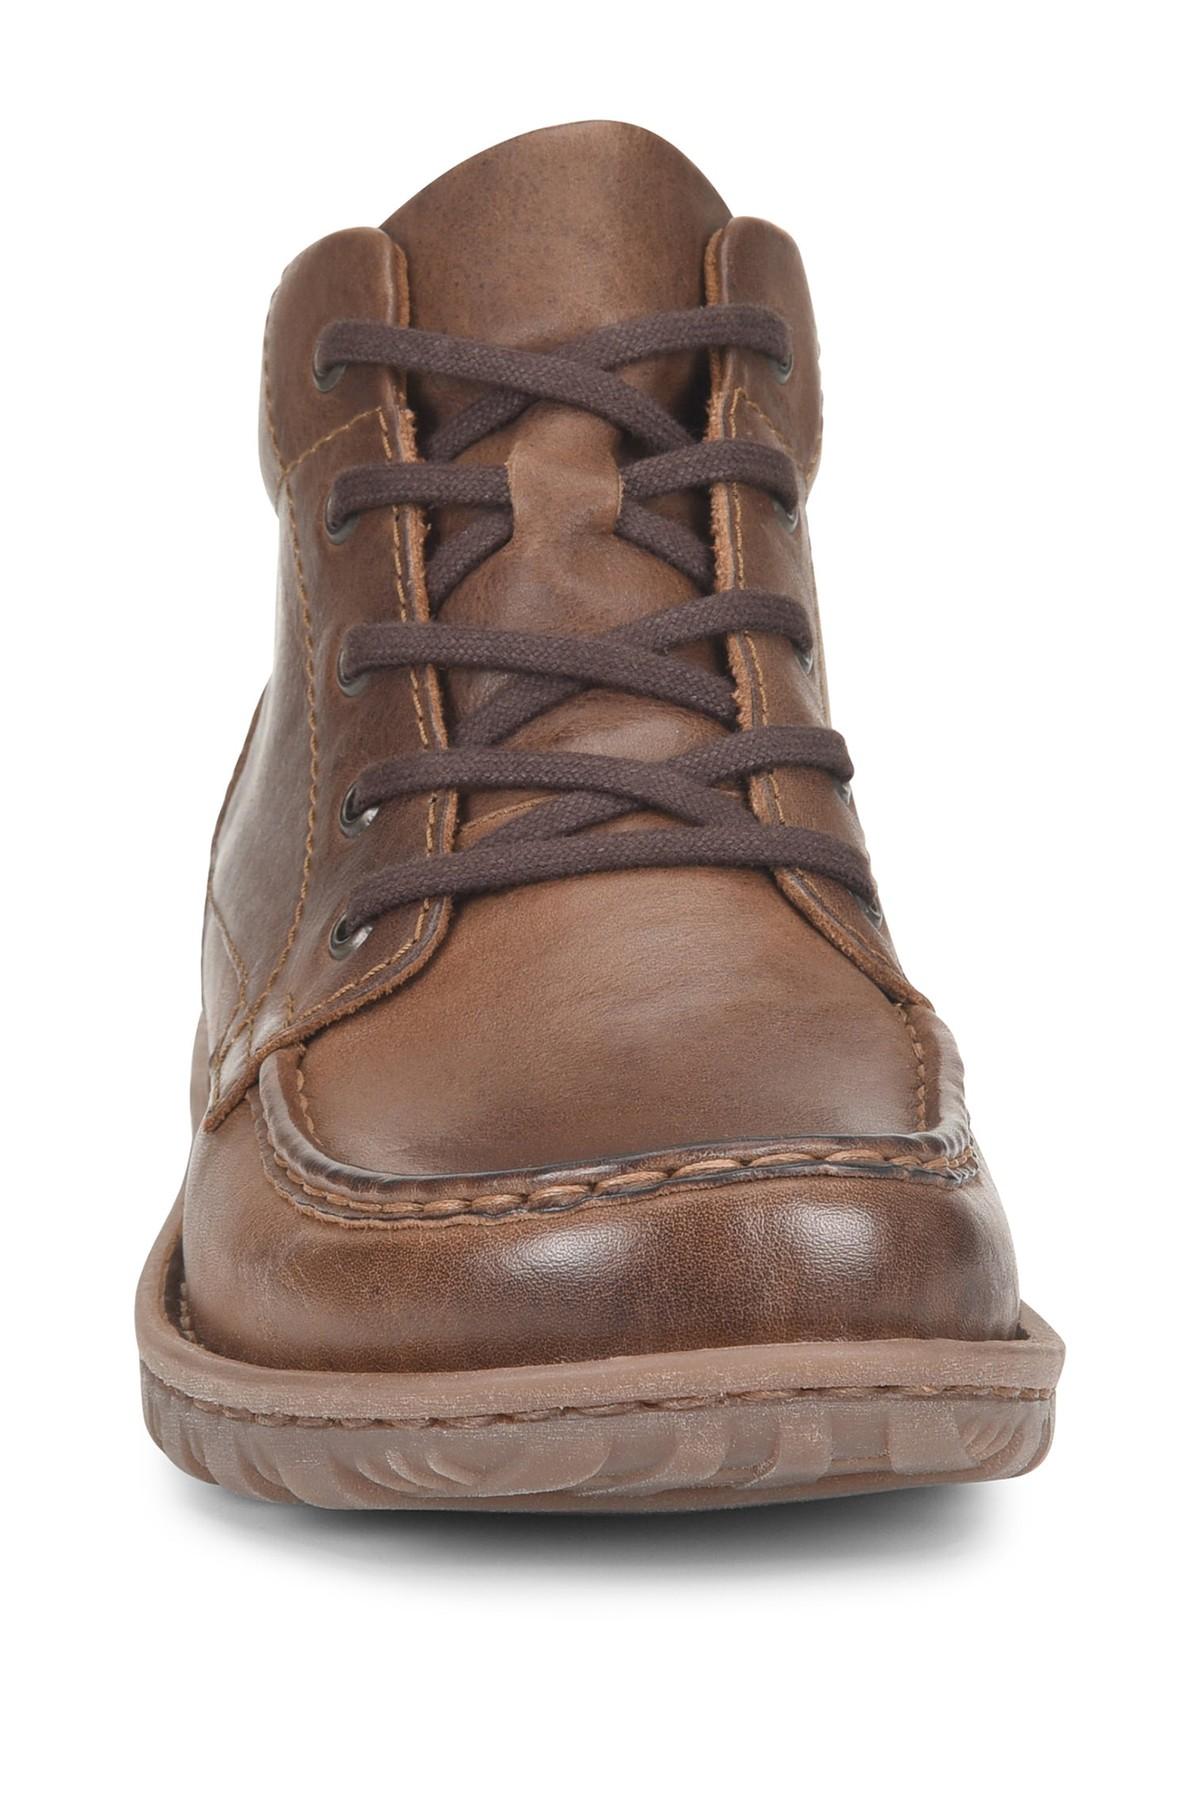 Born Gilden Leather Boot in Brown for 